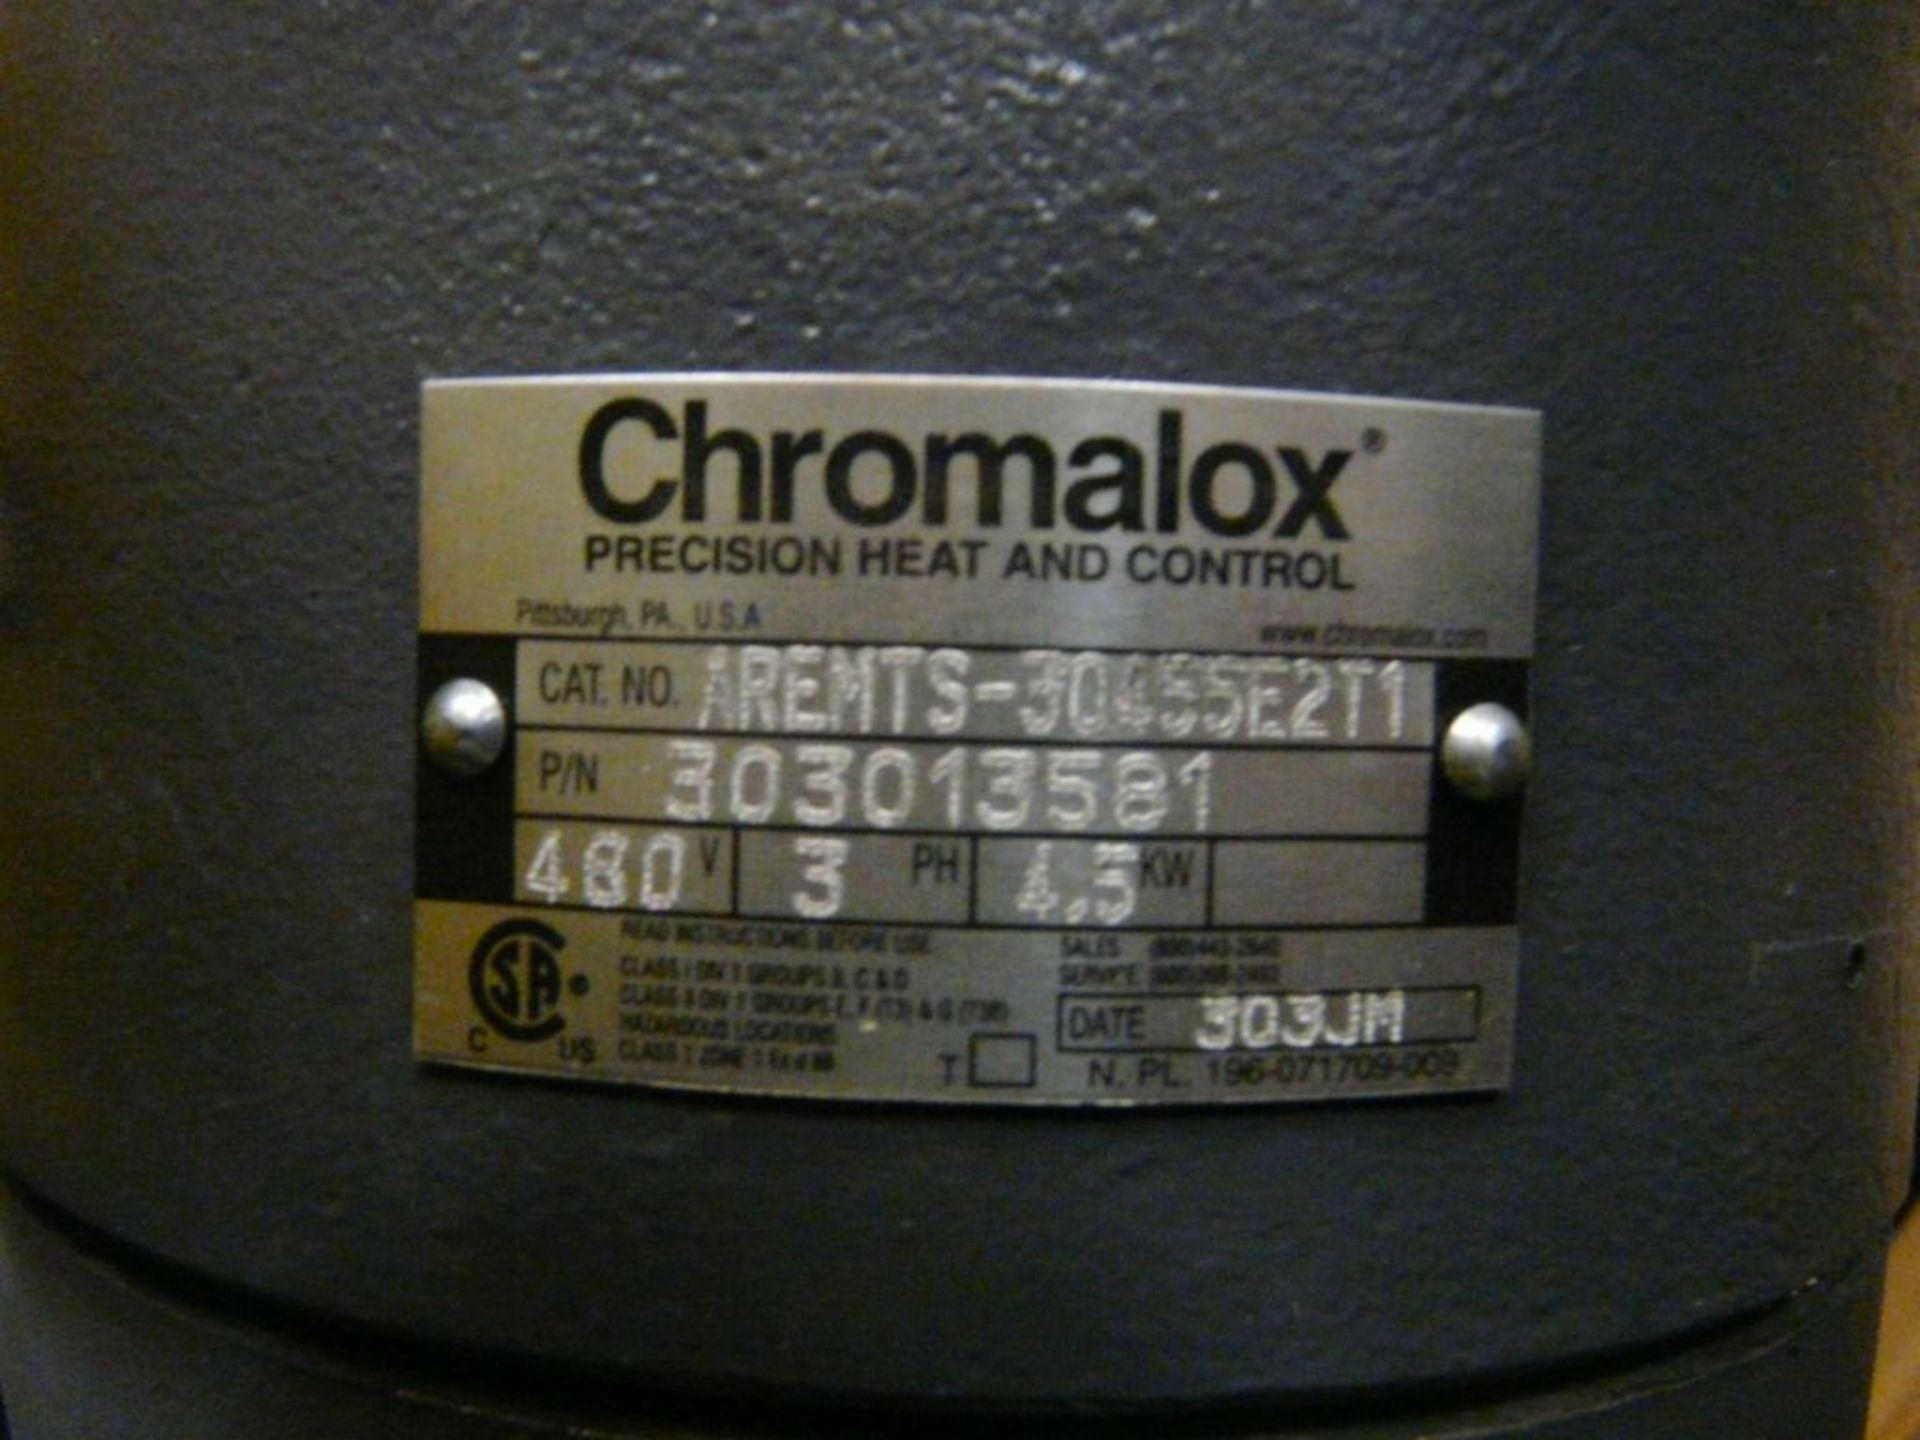 Chromalox Screw Plug Immersion Heater | Cat No. AREMTS-30455E2T1; Part No. 303013581 - Image 3 of 3